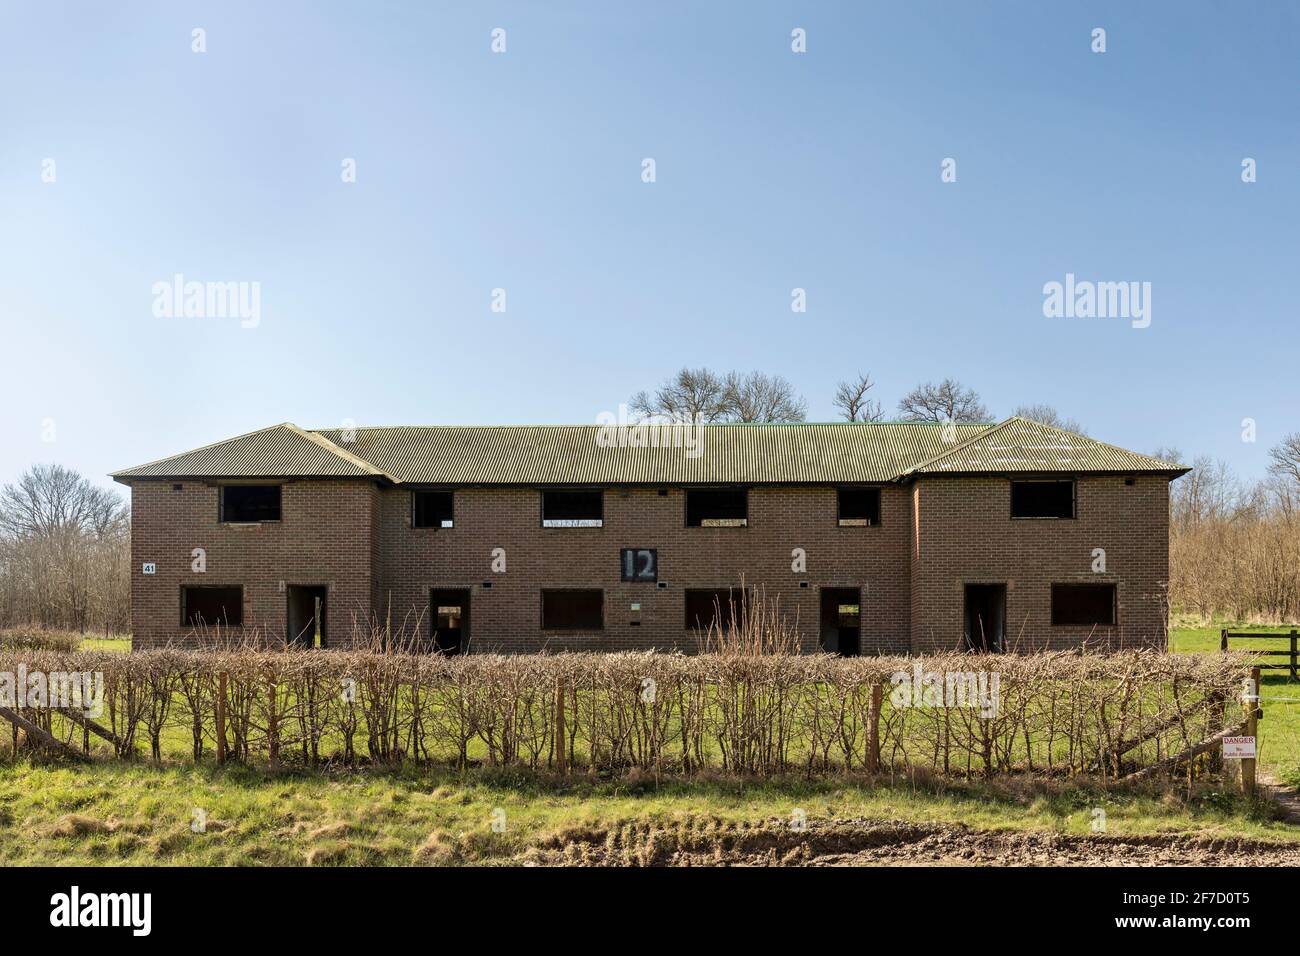 The council houses in the deserted village of Imber which now serves as the British Army training grounds, Salisbury Plain, Wiltshire, England, UK Stock Photo